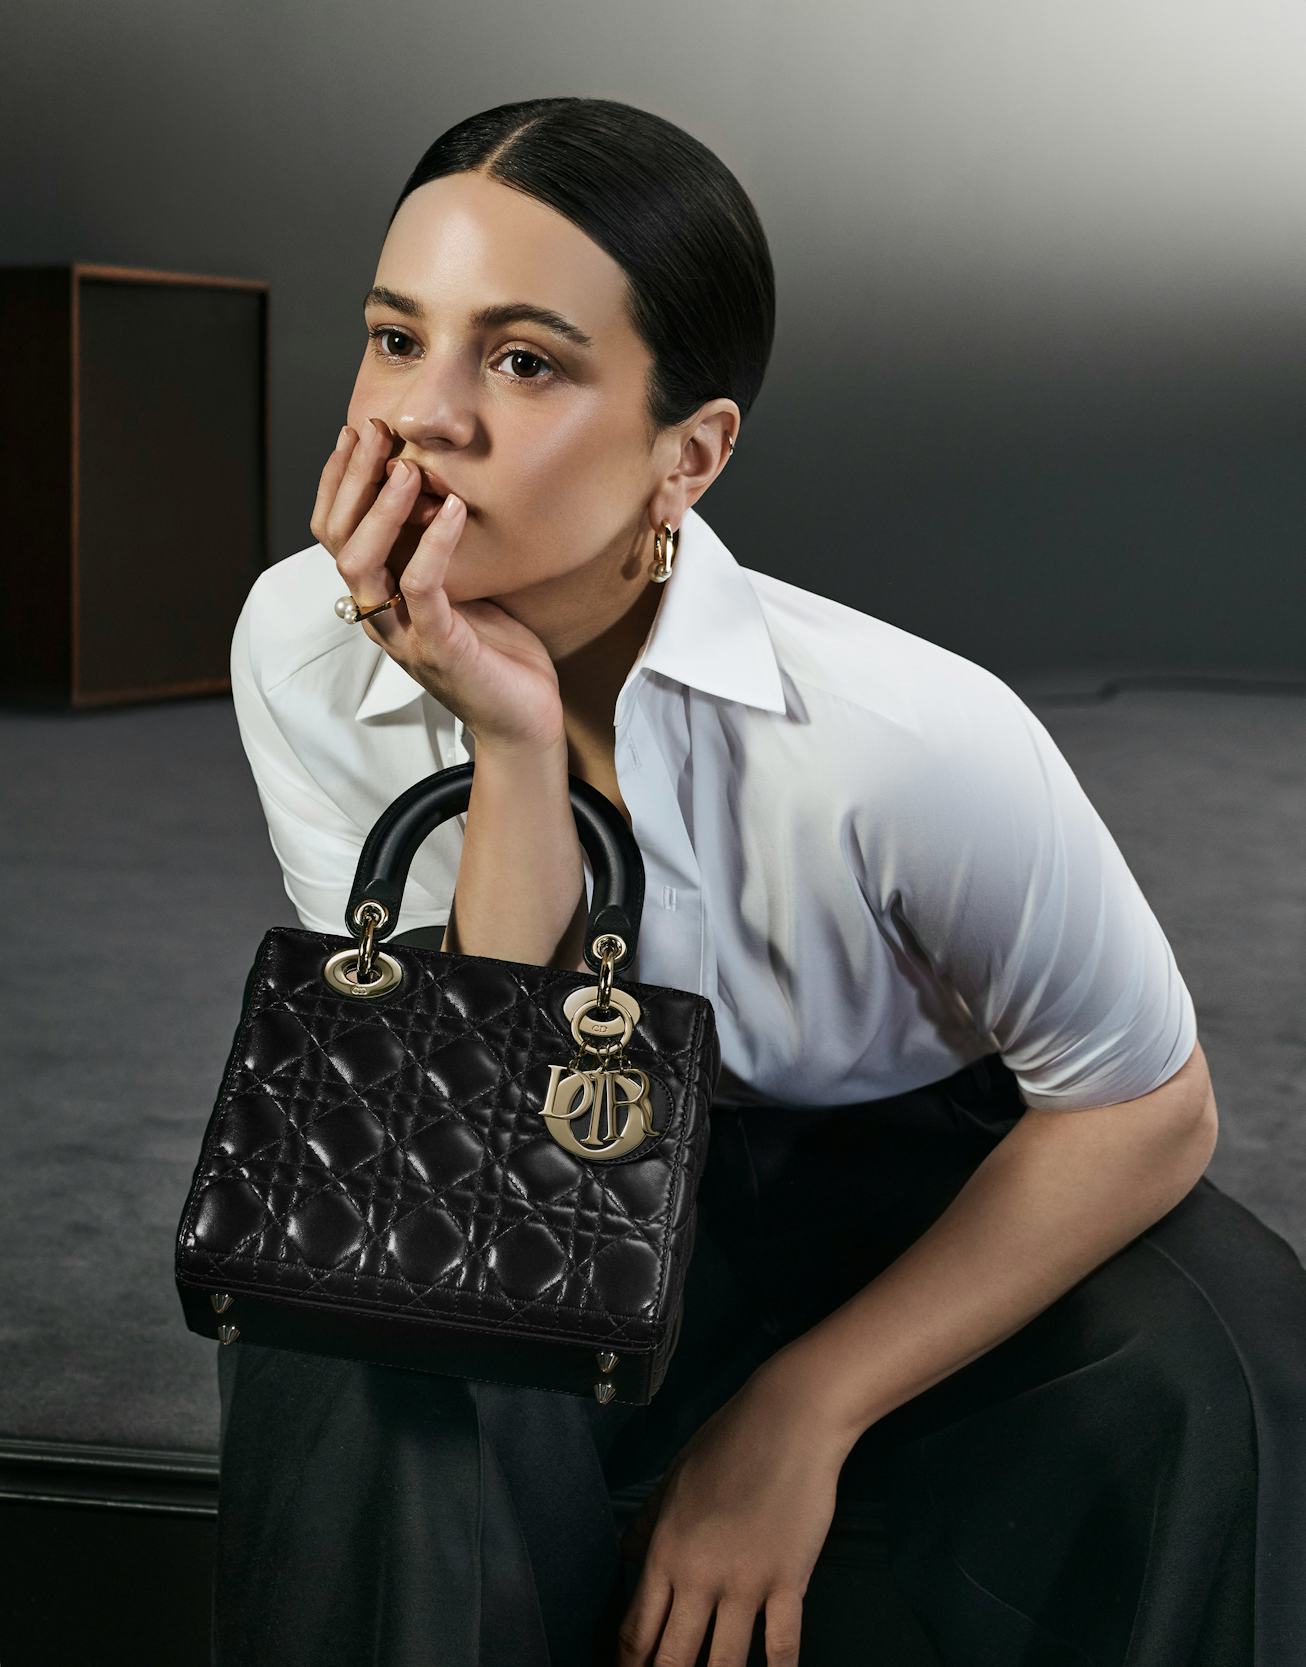 Woman in a white blouse leans forward, holding a stylish black quilted Dior handbag, with a thoughtf...